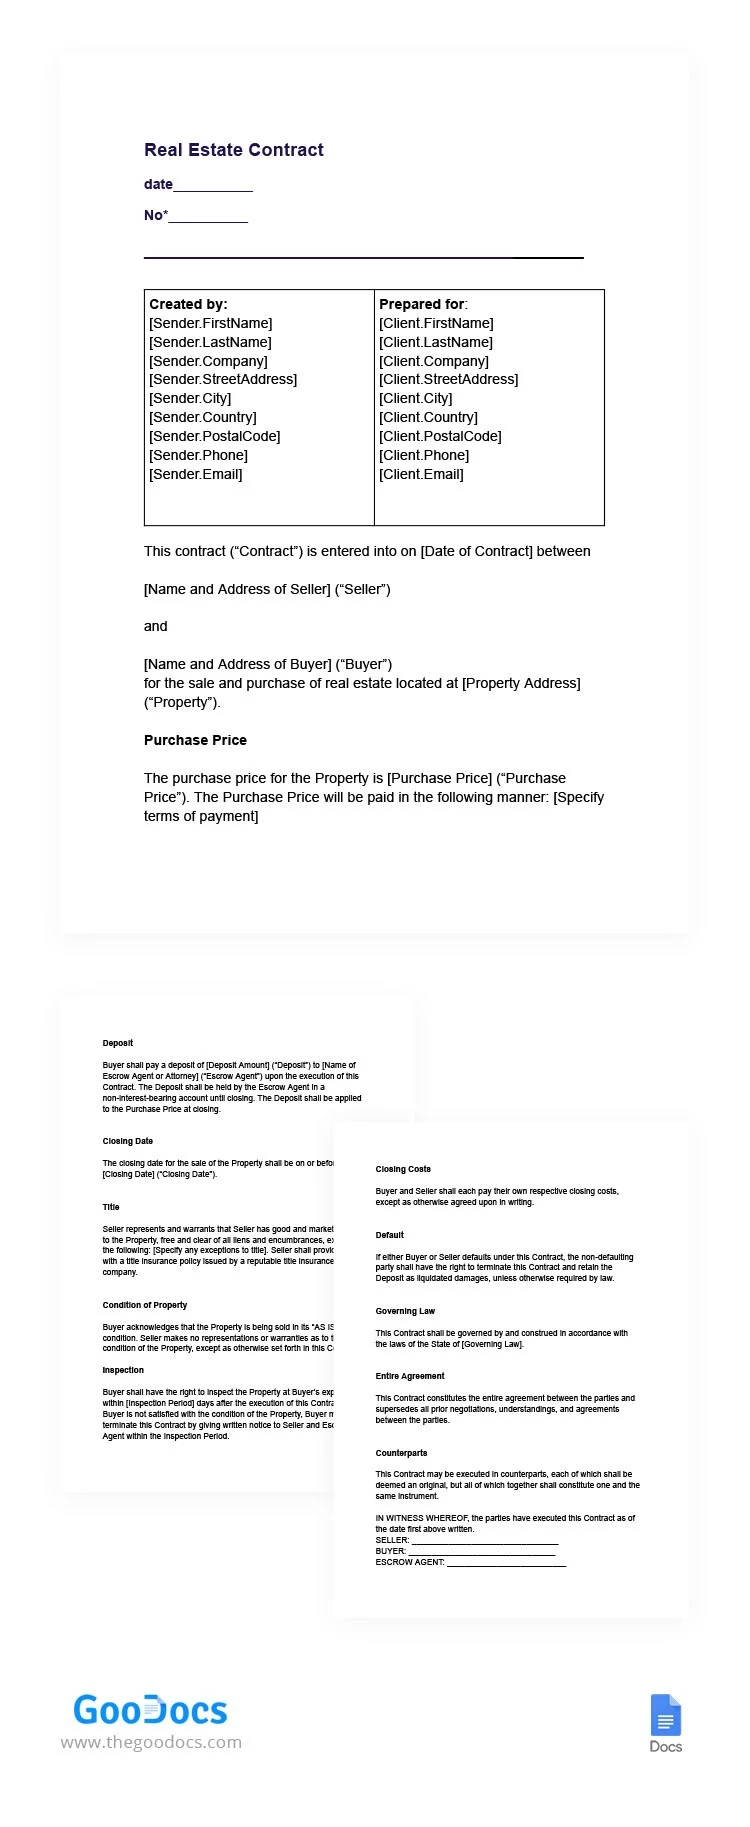 Real Estate Contract - free Google Docs Template - 10065737